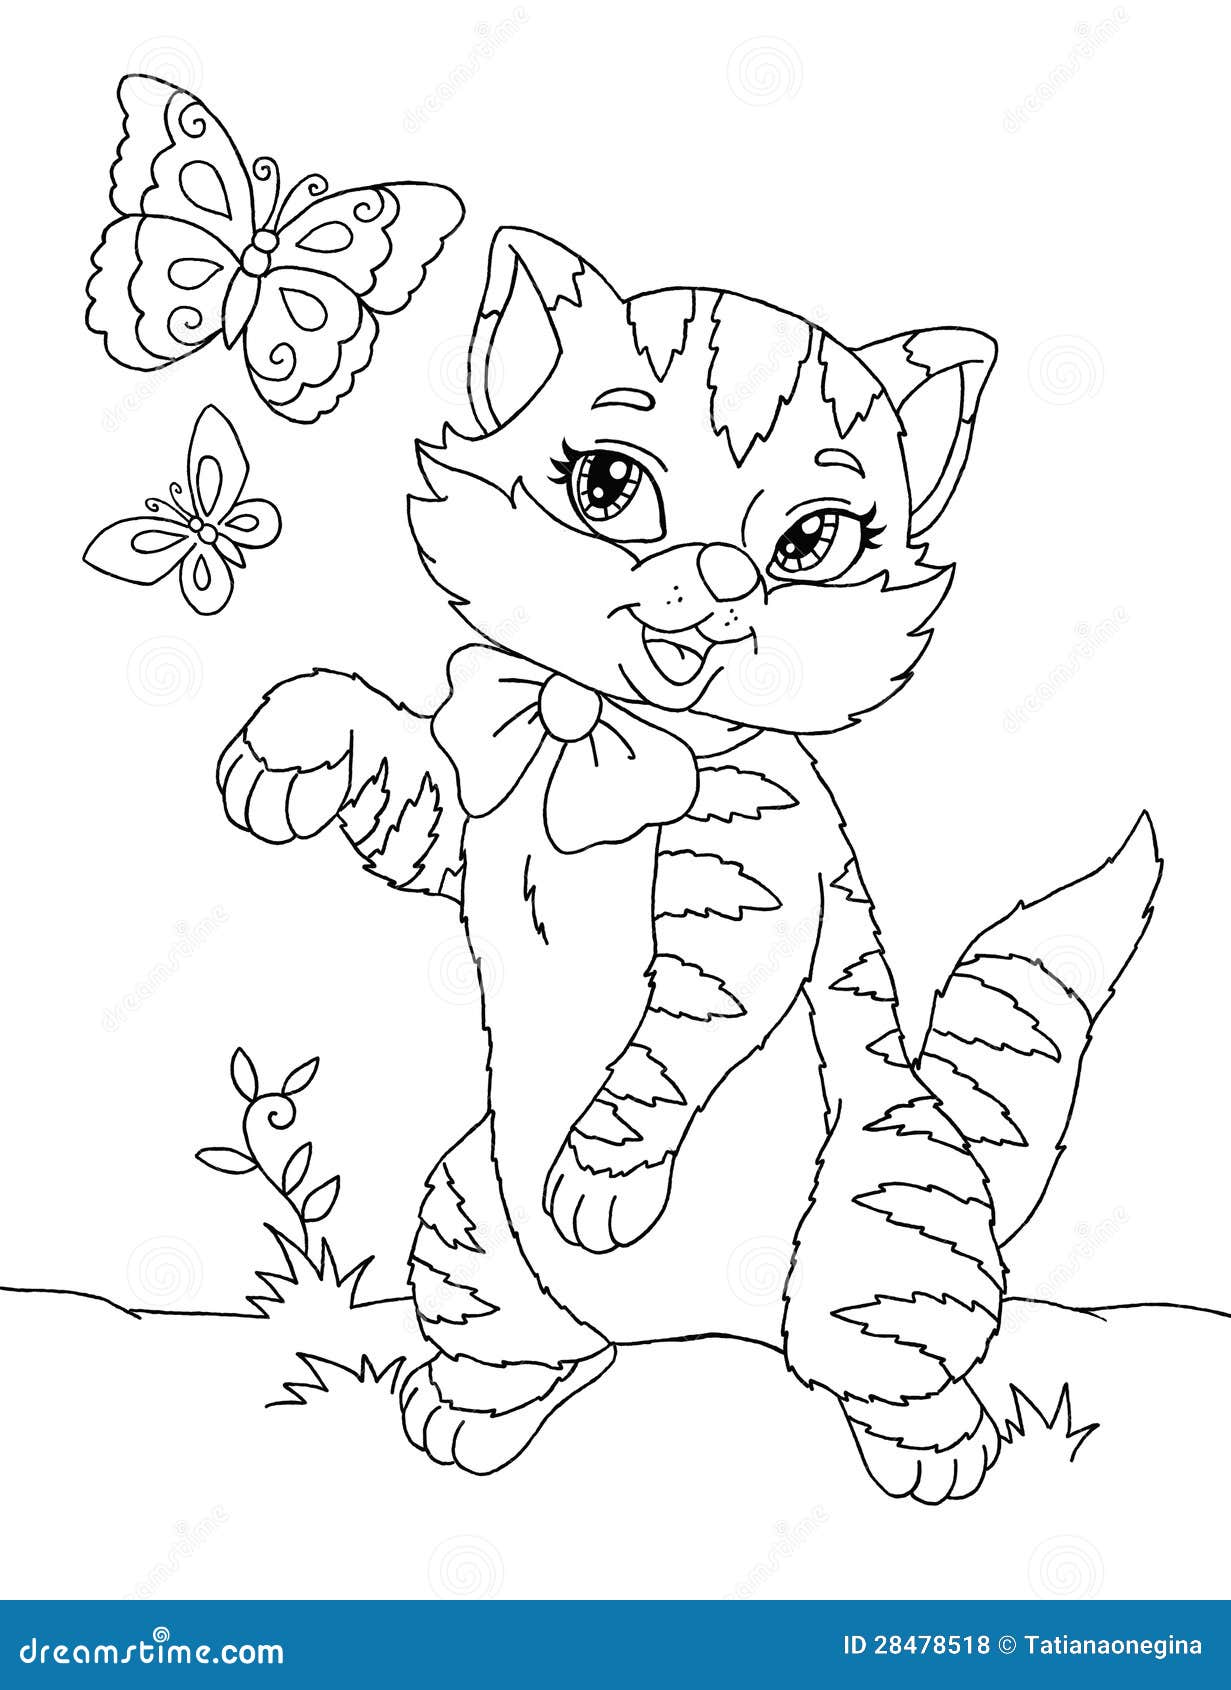 Kitty coloring page stock illustration. Illustration of funny - 28478518